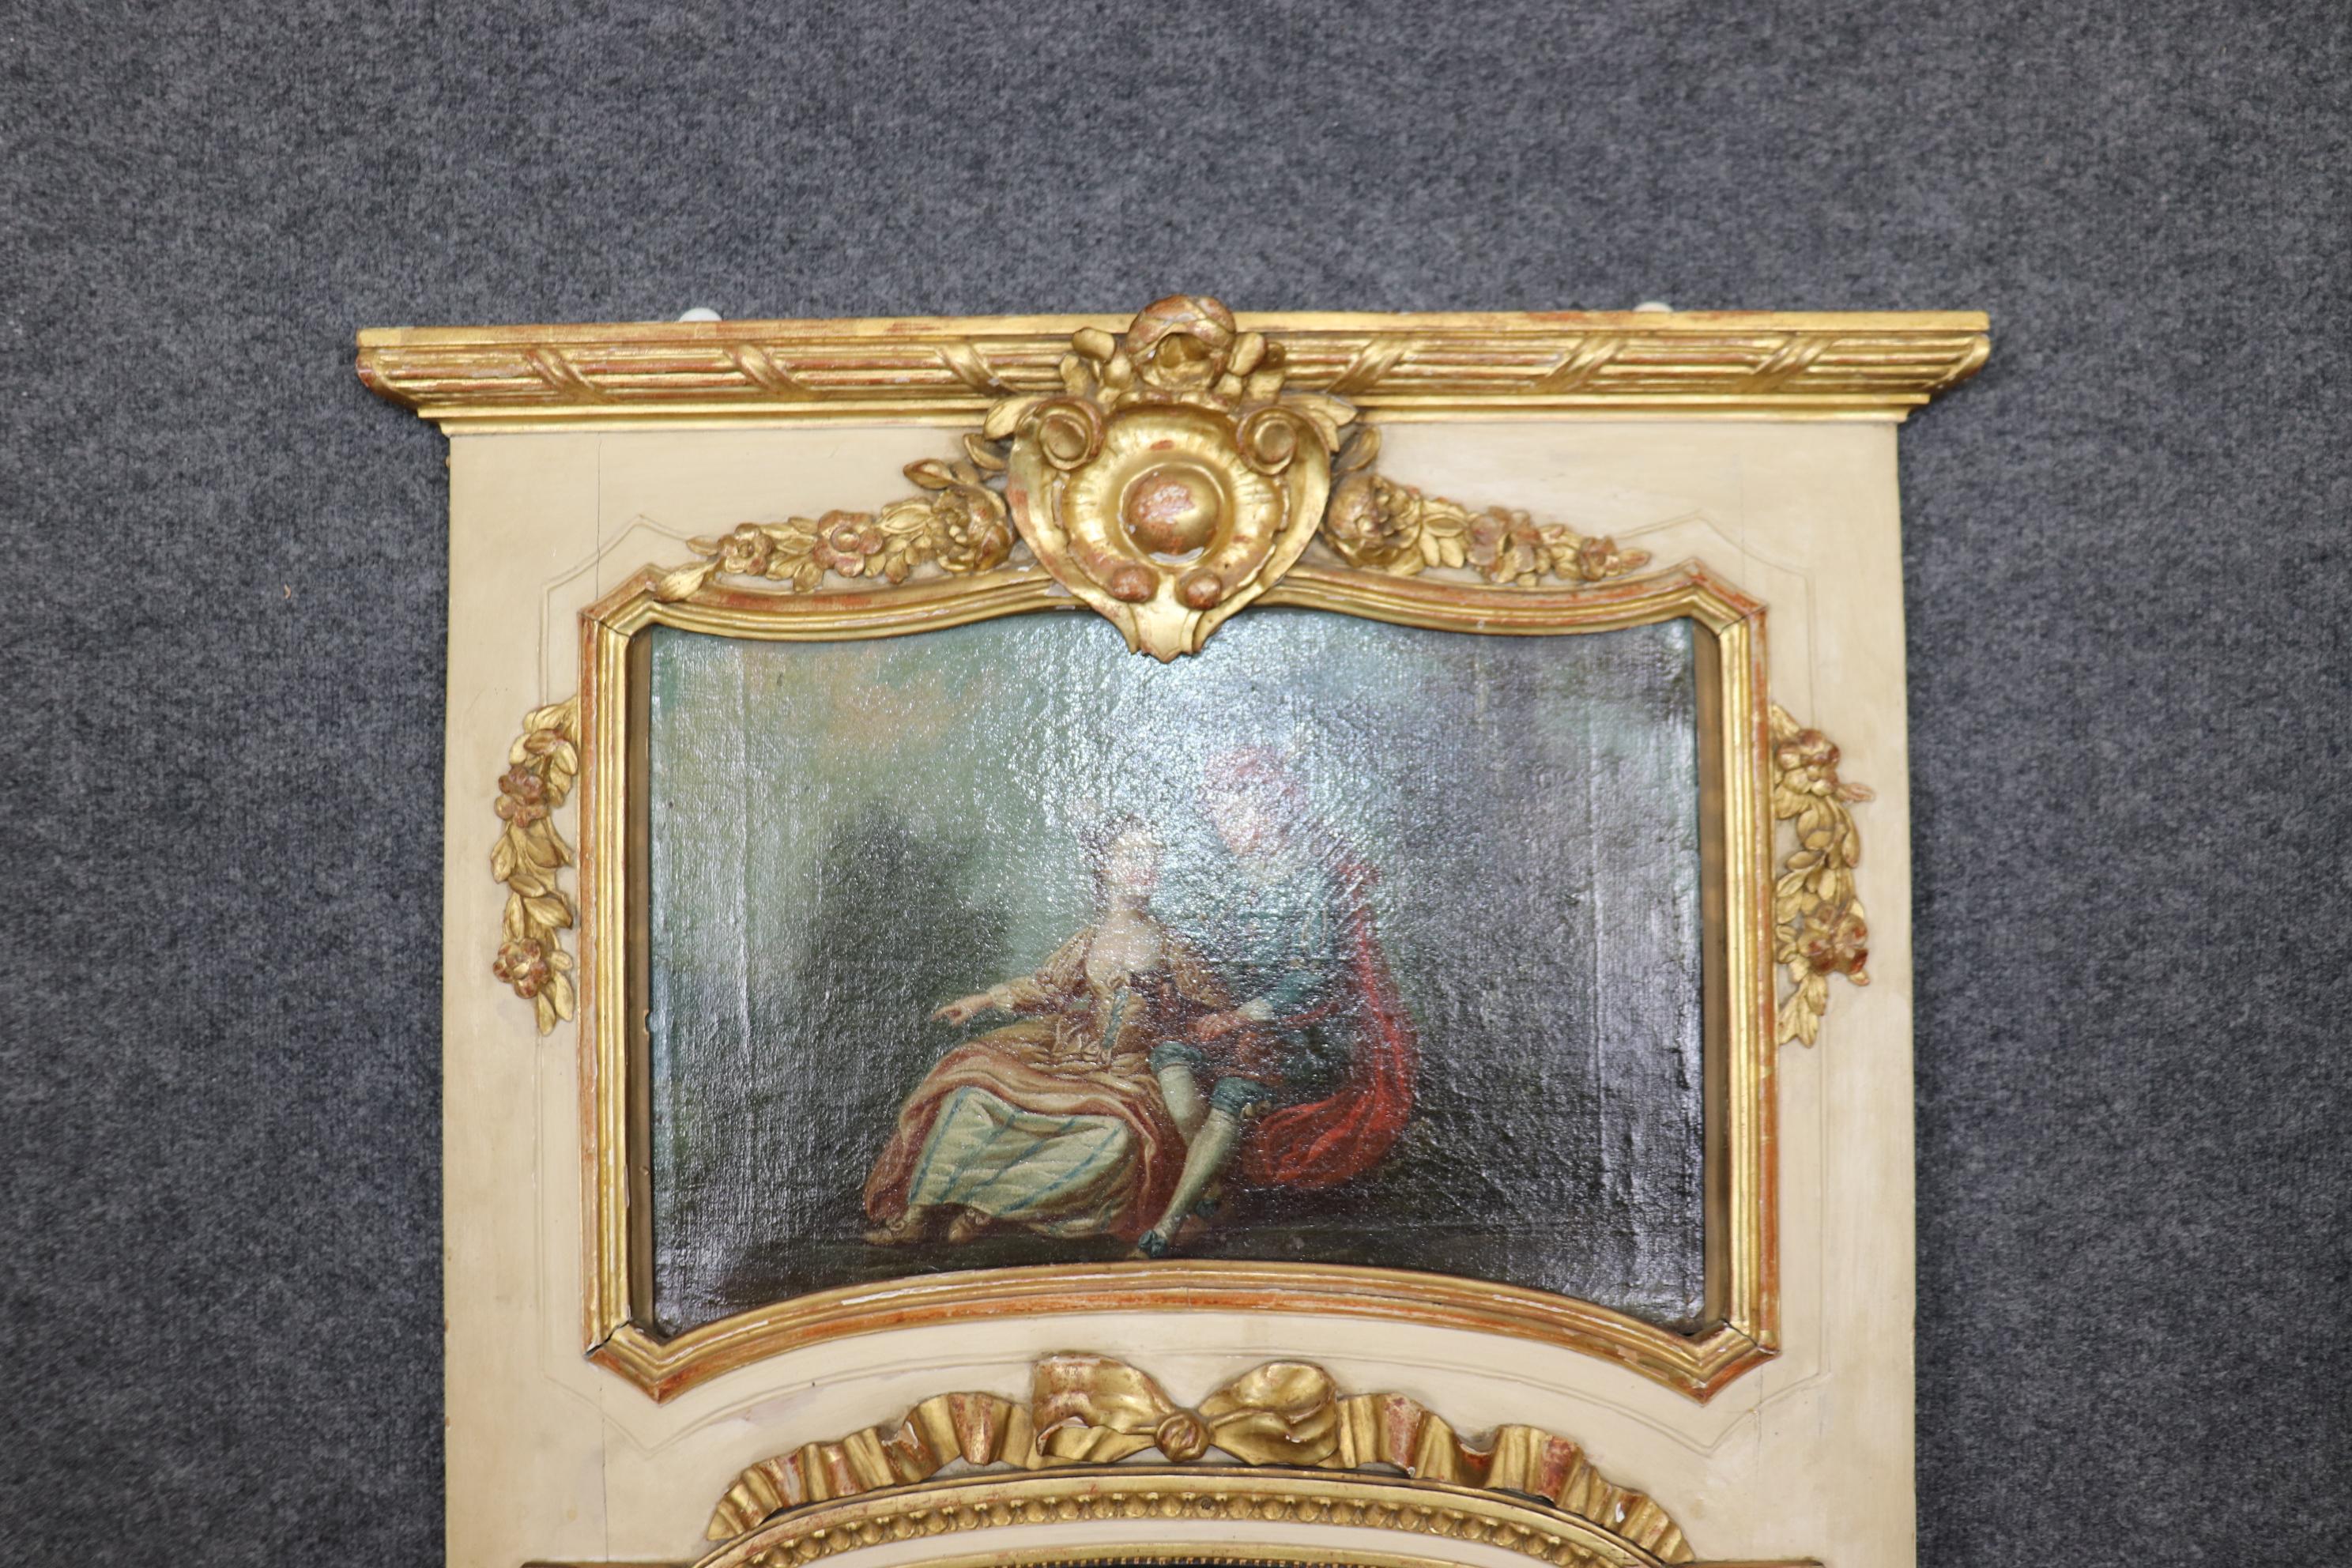 This is a superb and very rare French trumeau mirror with a delightful oil painting of a traditional courtship scene between a wealthy man and his eager betrothed. The mirror is in good condition with normal and age-appropriate signs of wear and use